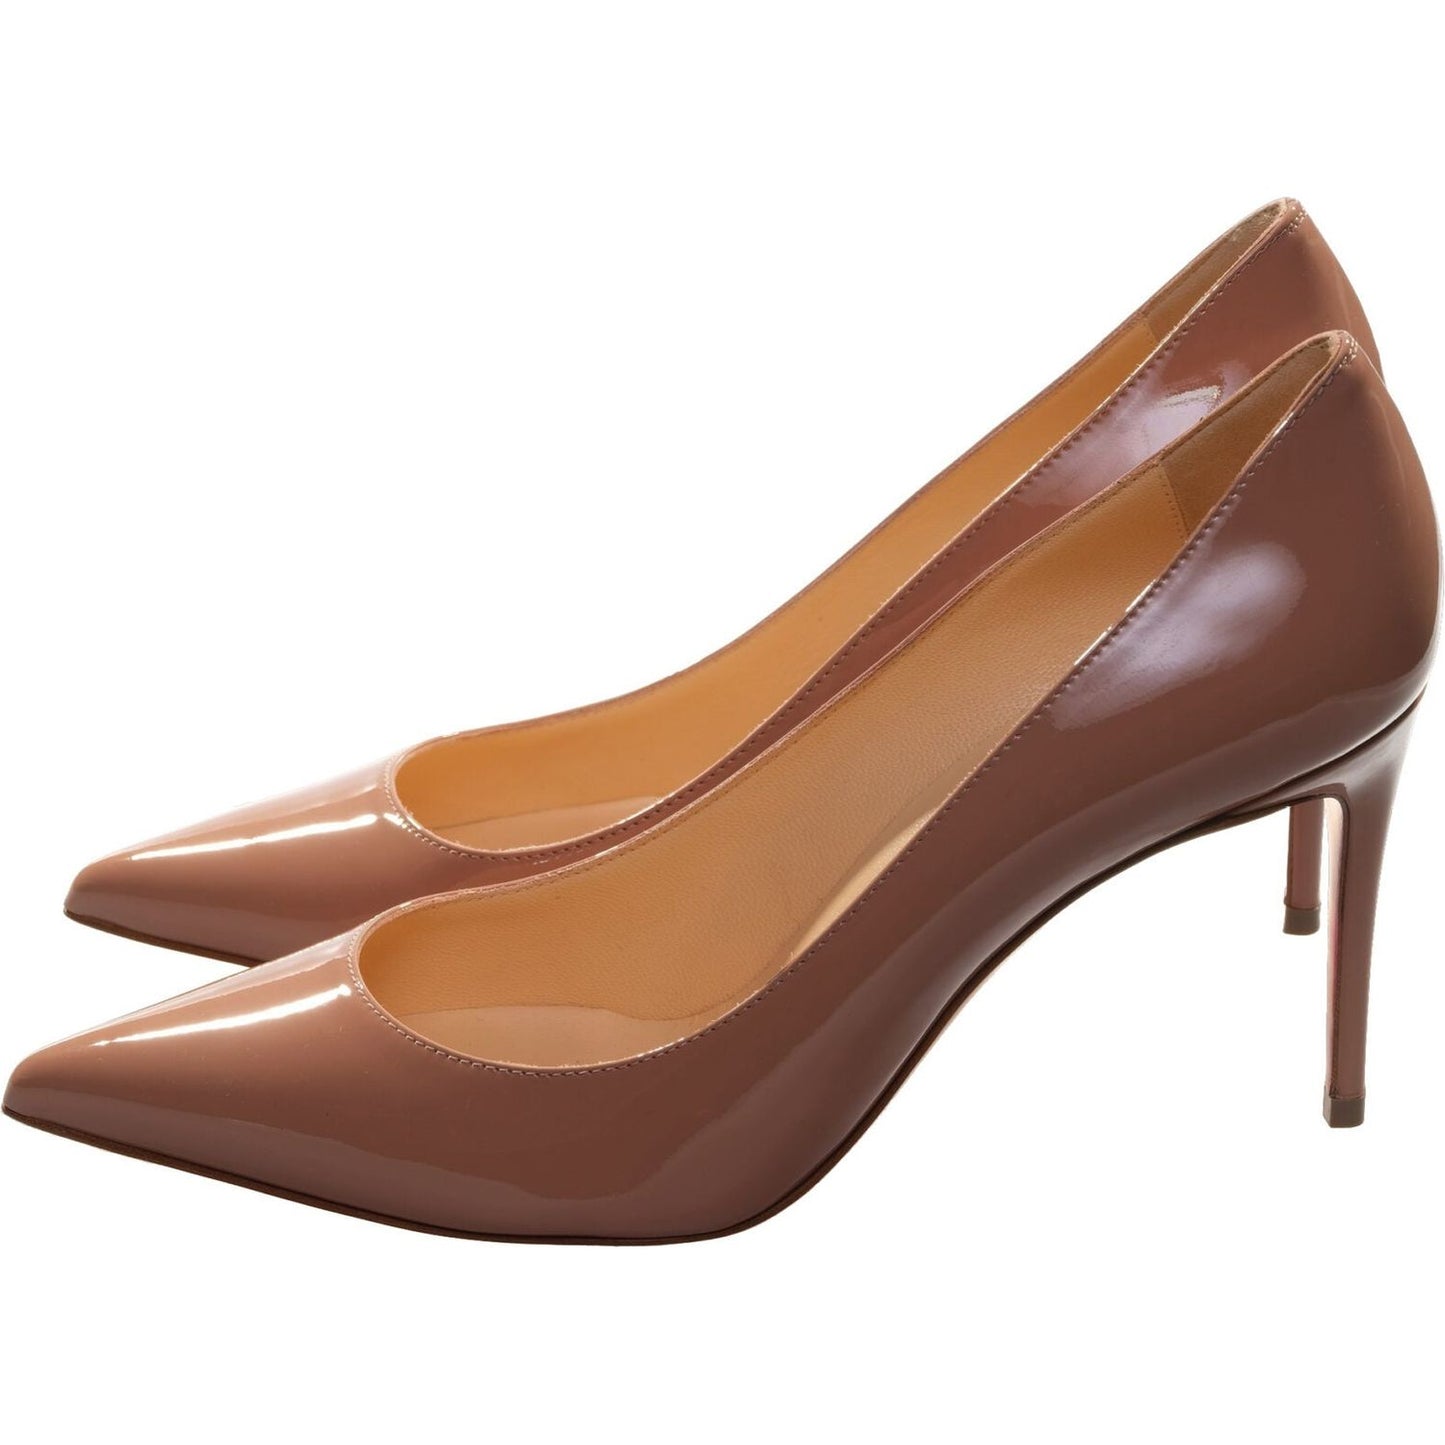 Kate Patent 85 Blush Nude Patent Leather High Heels